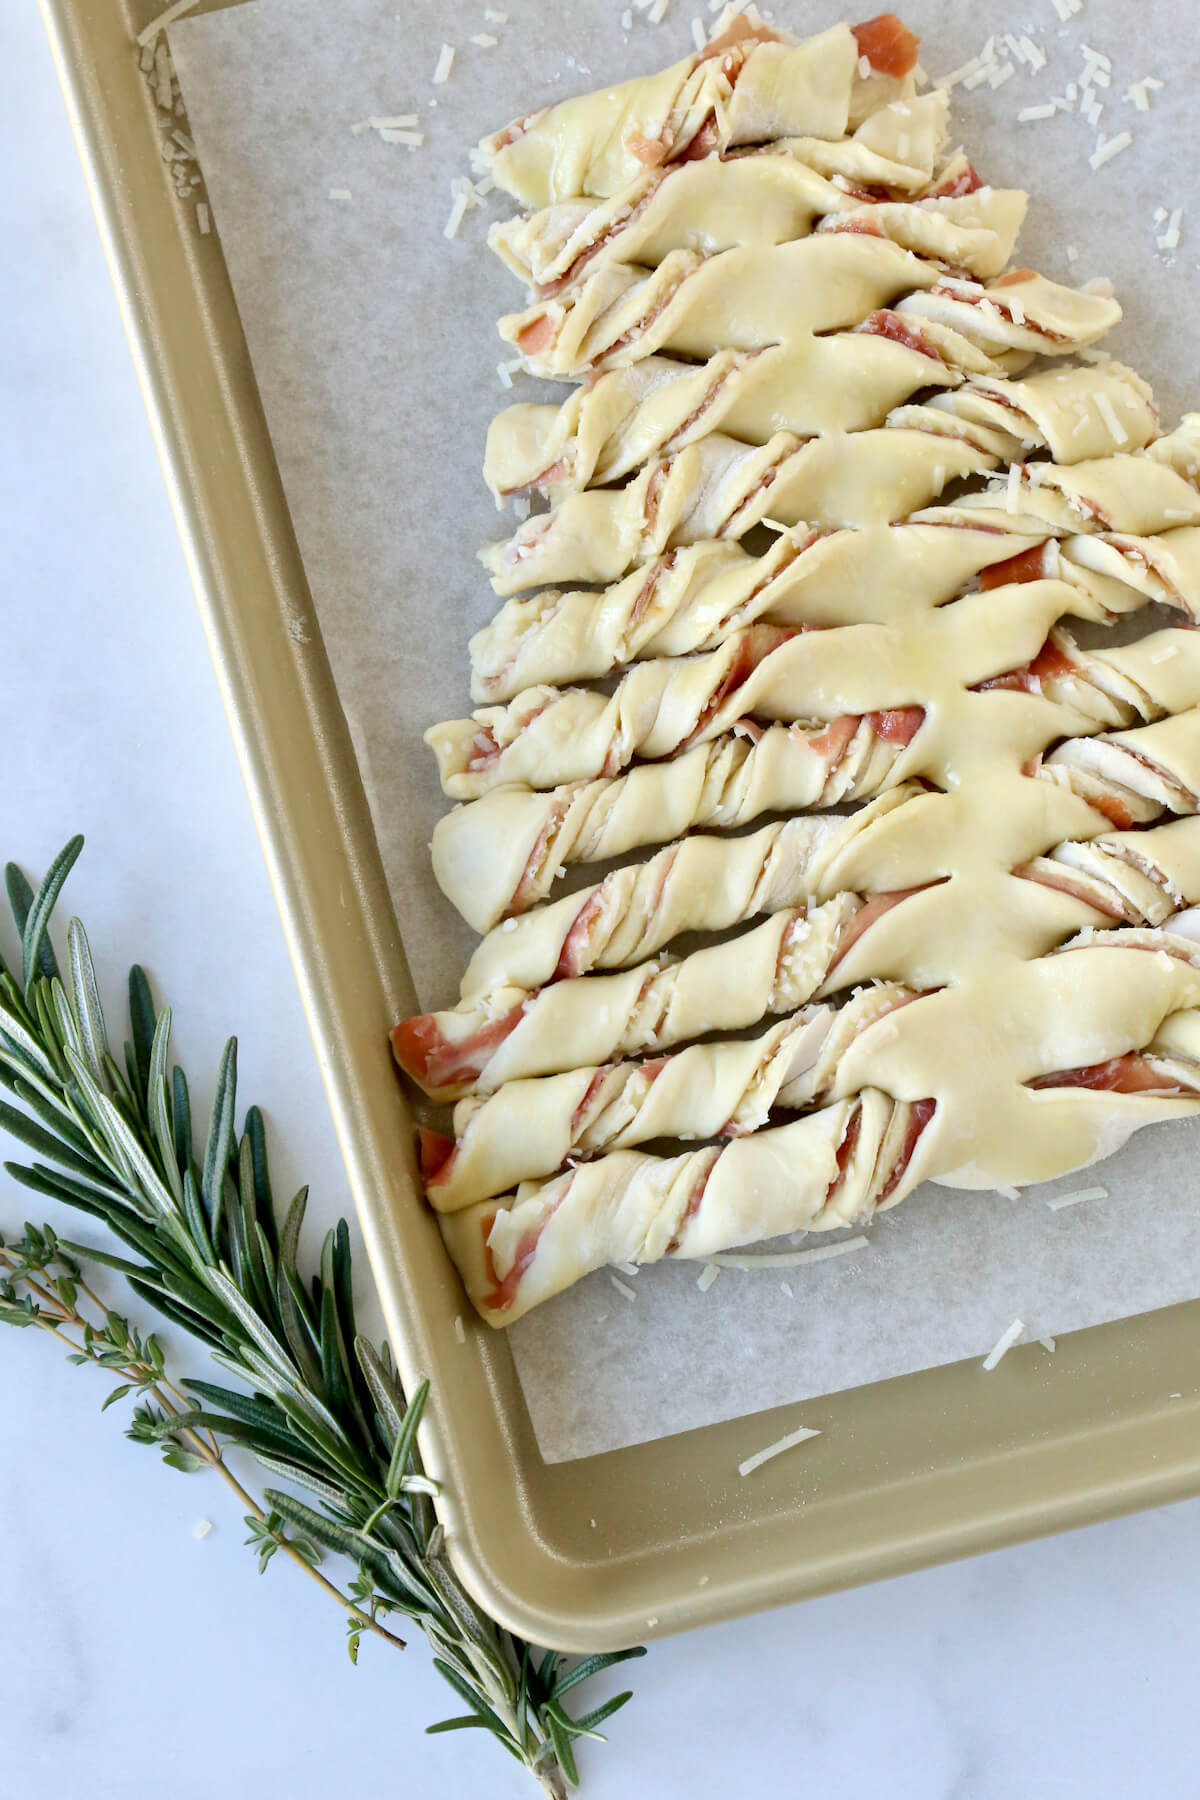 A gold baking sheet with an unbaked tree shaped puff pastry with fresh herbs next to it.